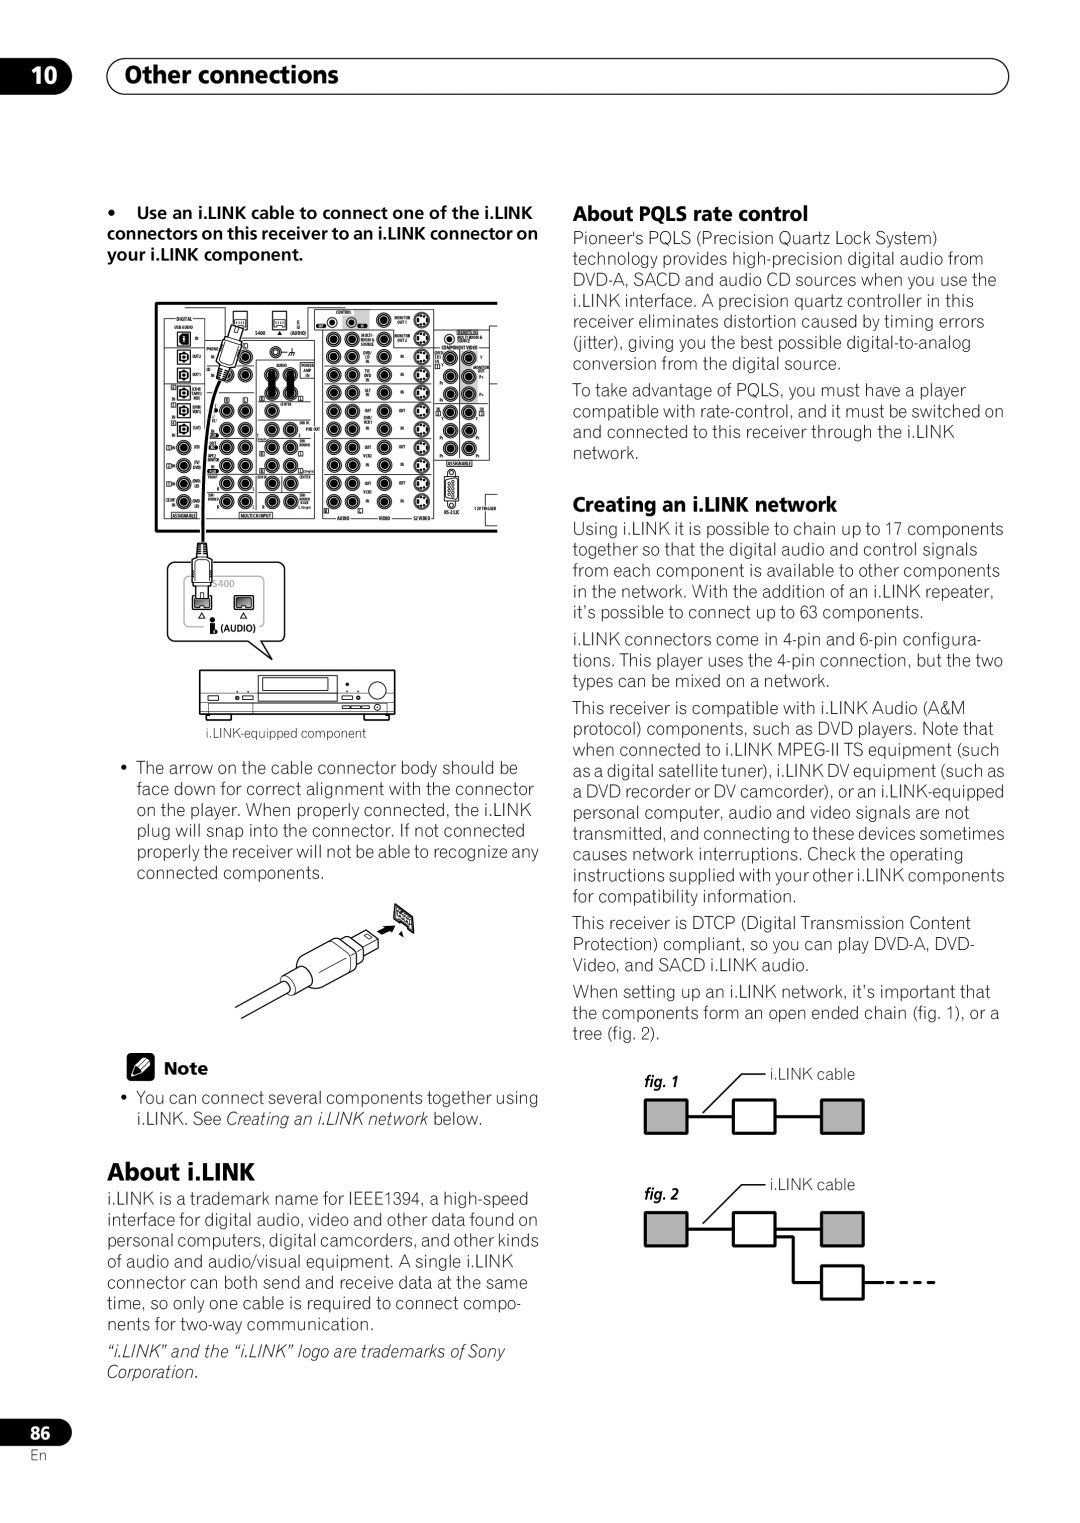 Pioneer VSX-59TXi About i.LINK, About PQLS rate control, Creating an i.LINK network, 10Other connections 